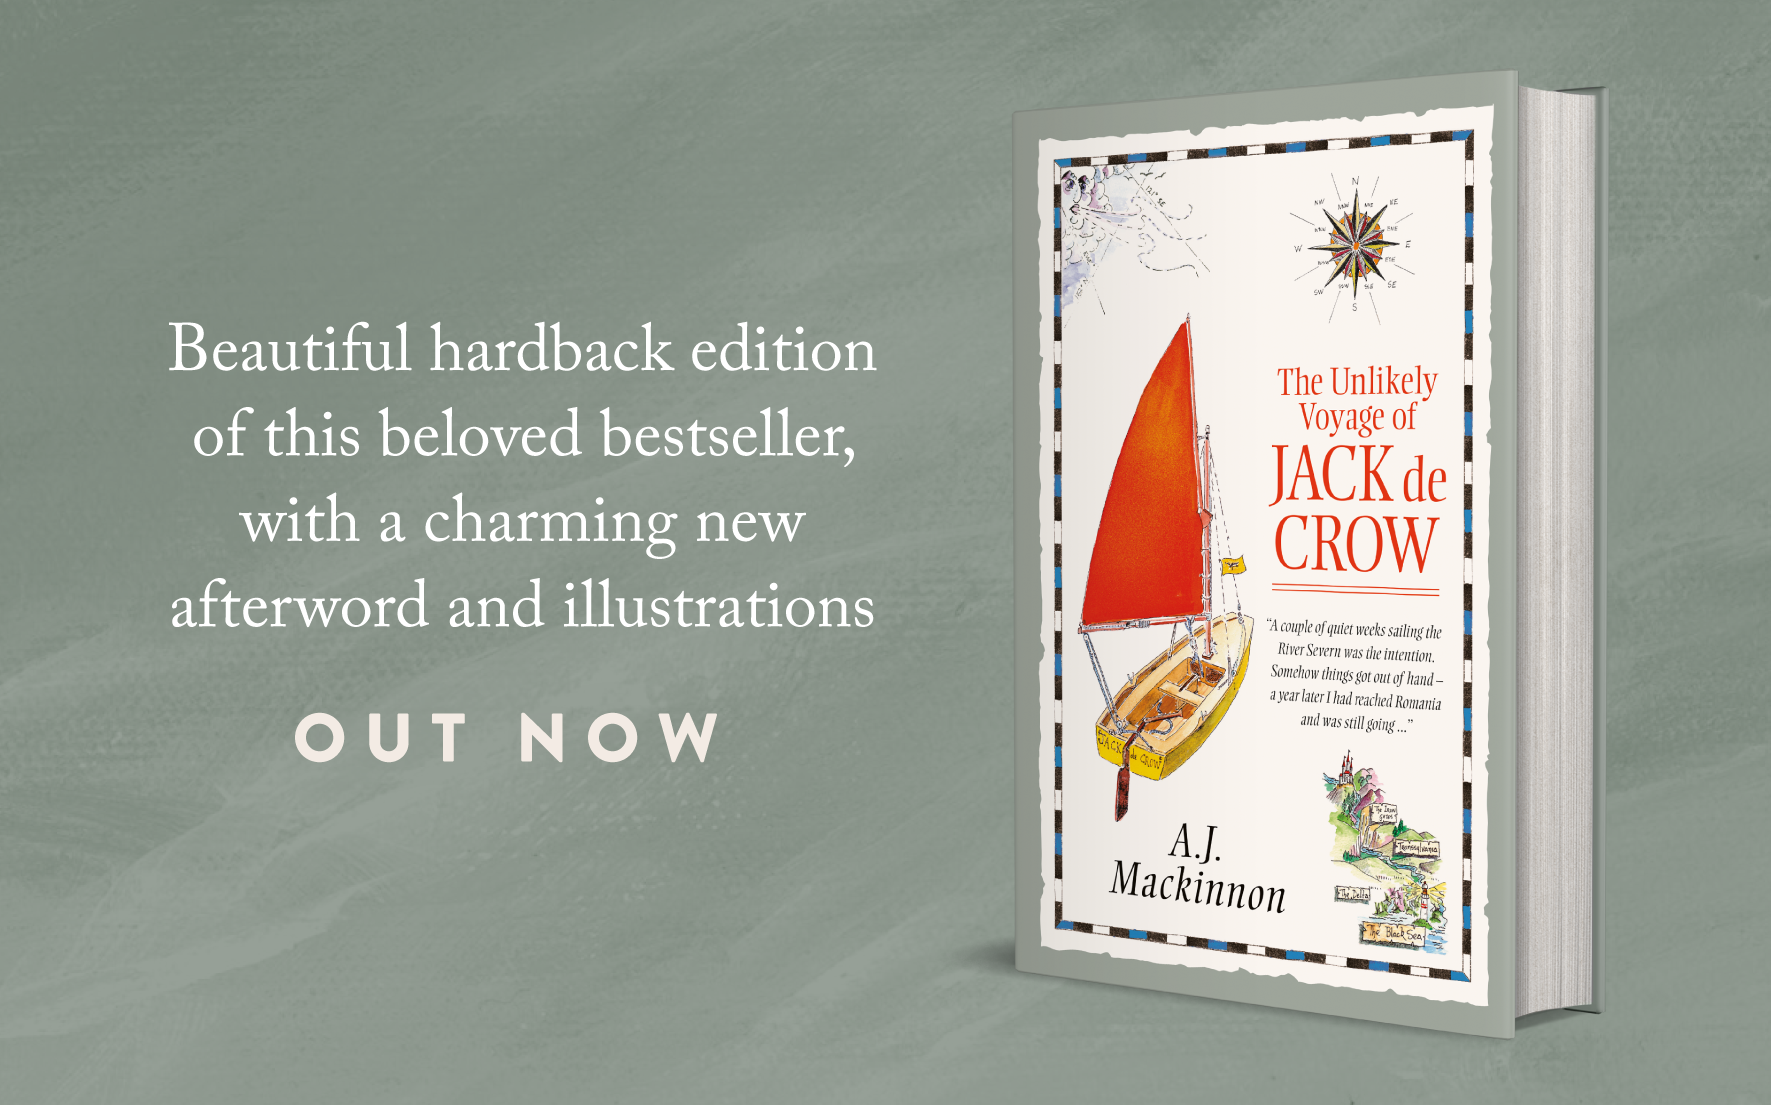 Out now: The Unlikely Voyage of Jack de Crow 